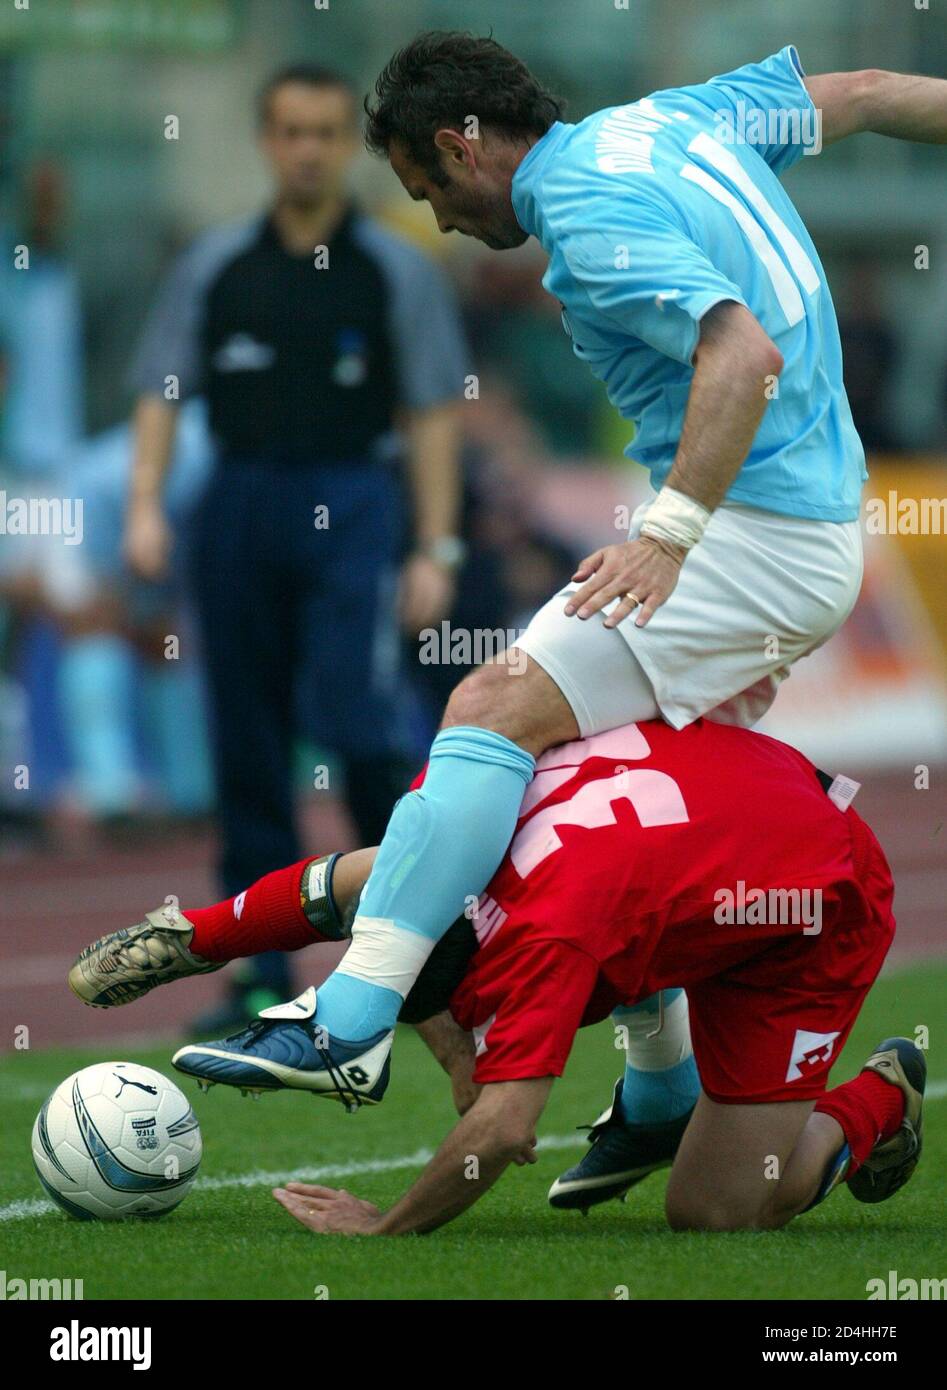 LAZIO'S SINISA MIHAJLOVIC TACKLES MARCO MARCHIONNI OF PIACENZA FOR THE BALL AND MATTEO ABATE OF PIACENZA DURING THEIR SERIE A MATCH. Stock Photo